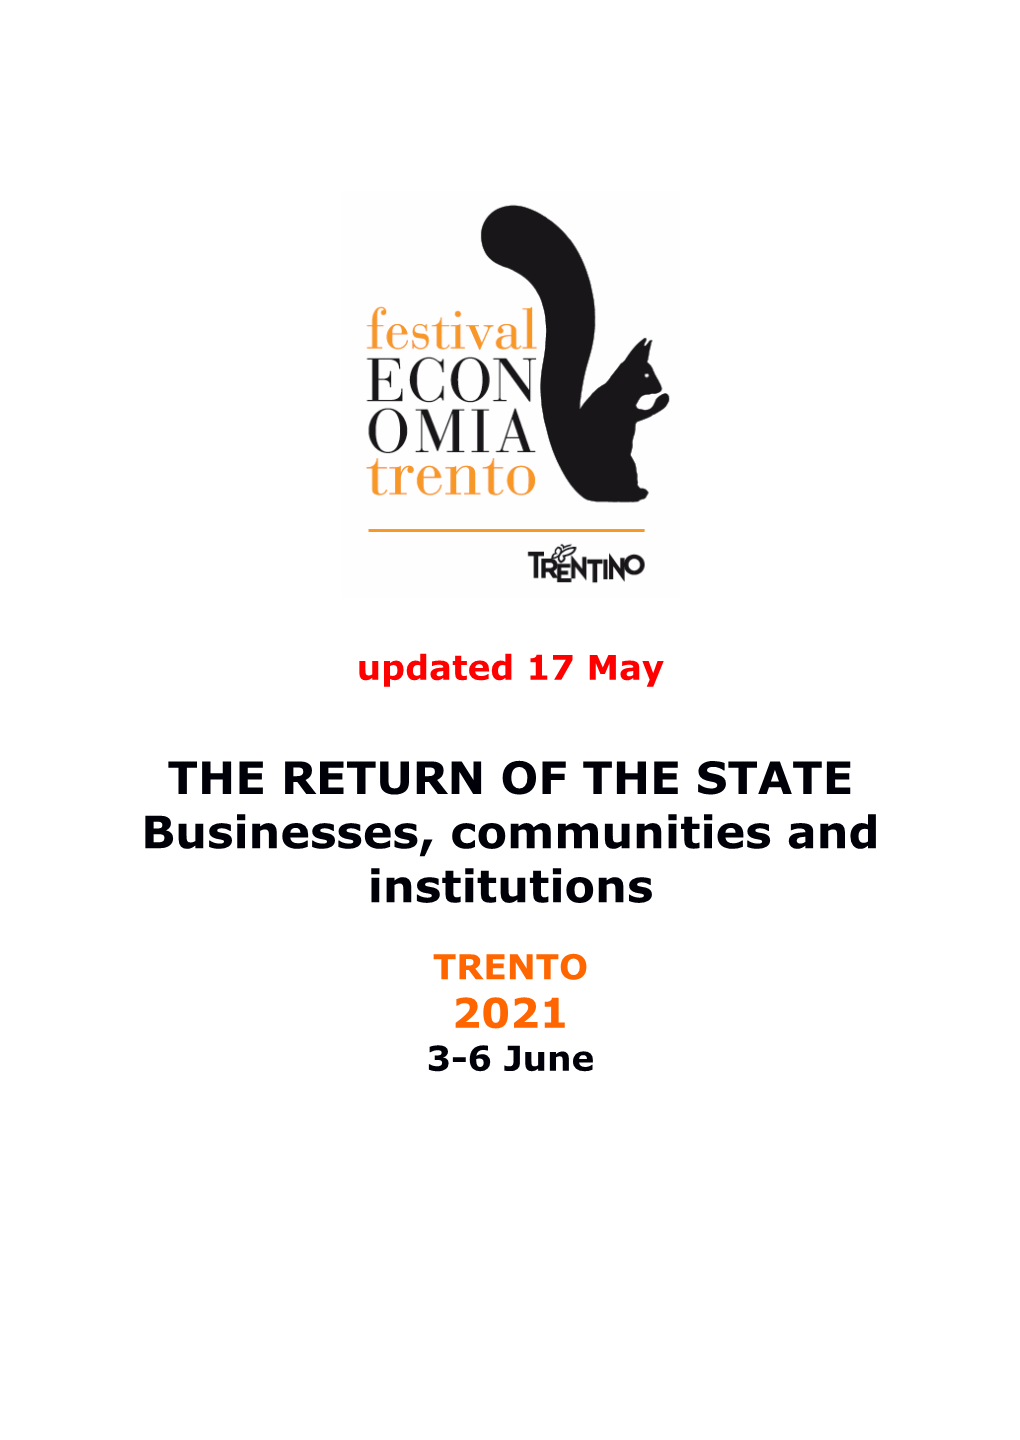 THE RETURN of the STATE Businesses, Communities and Institutions